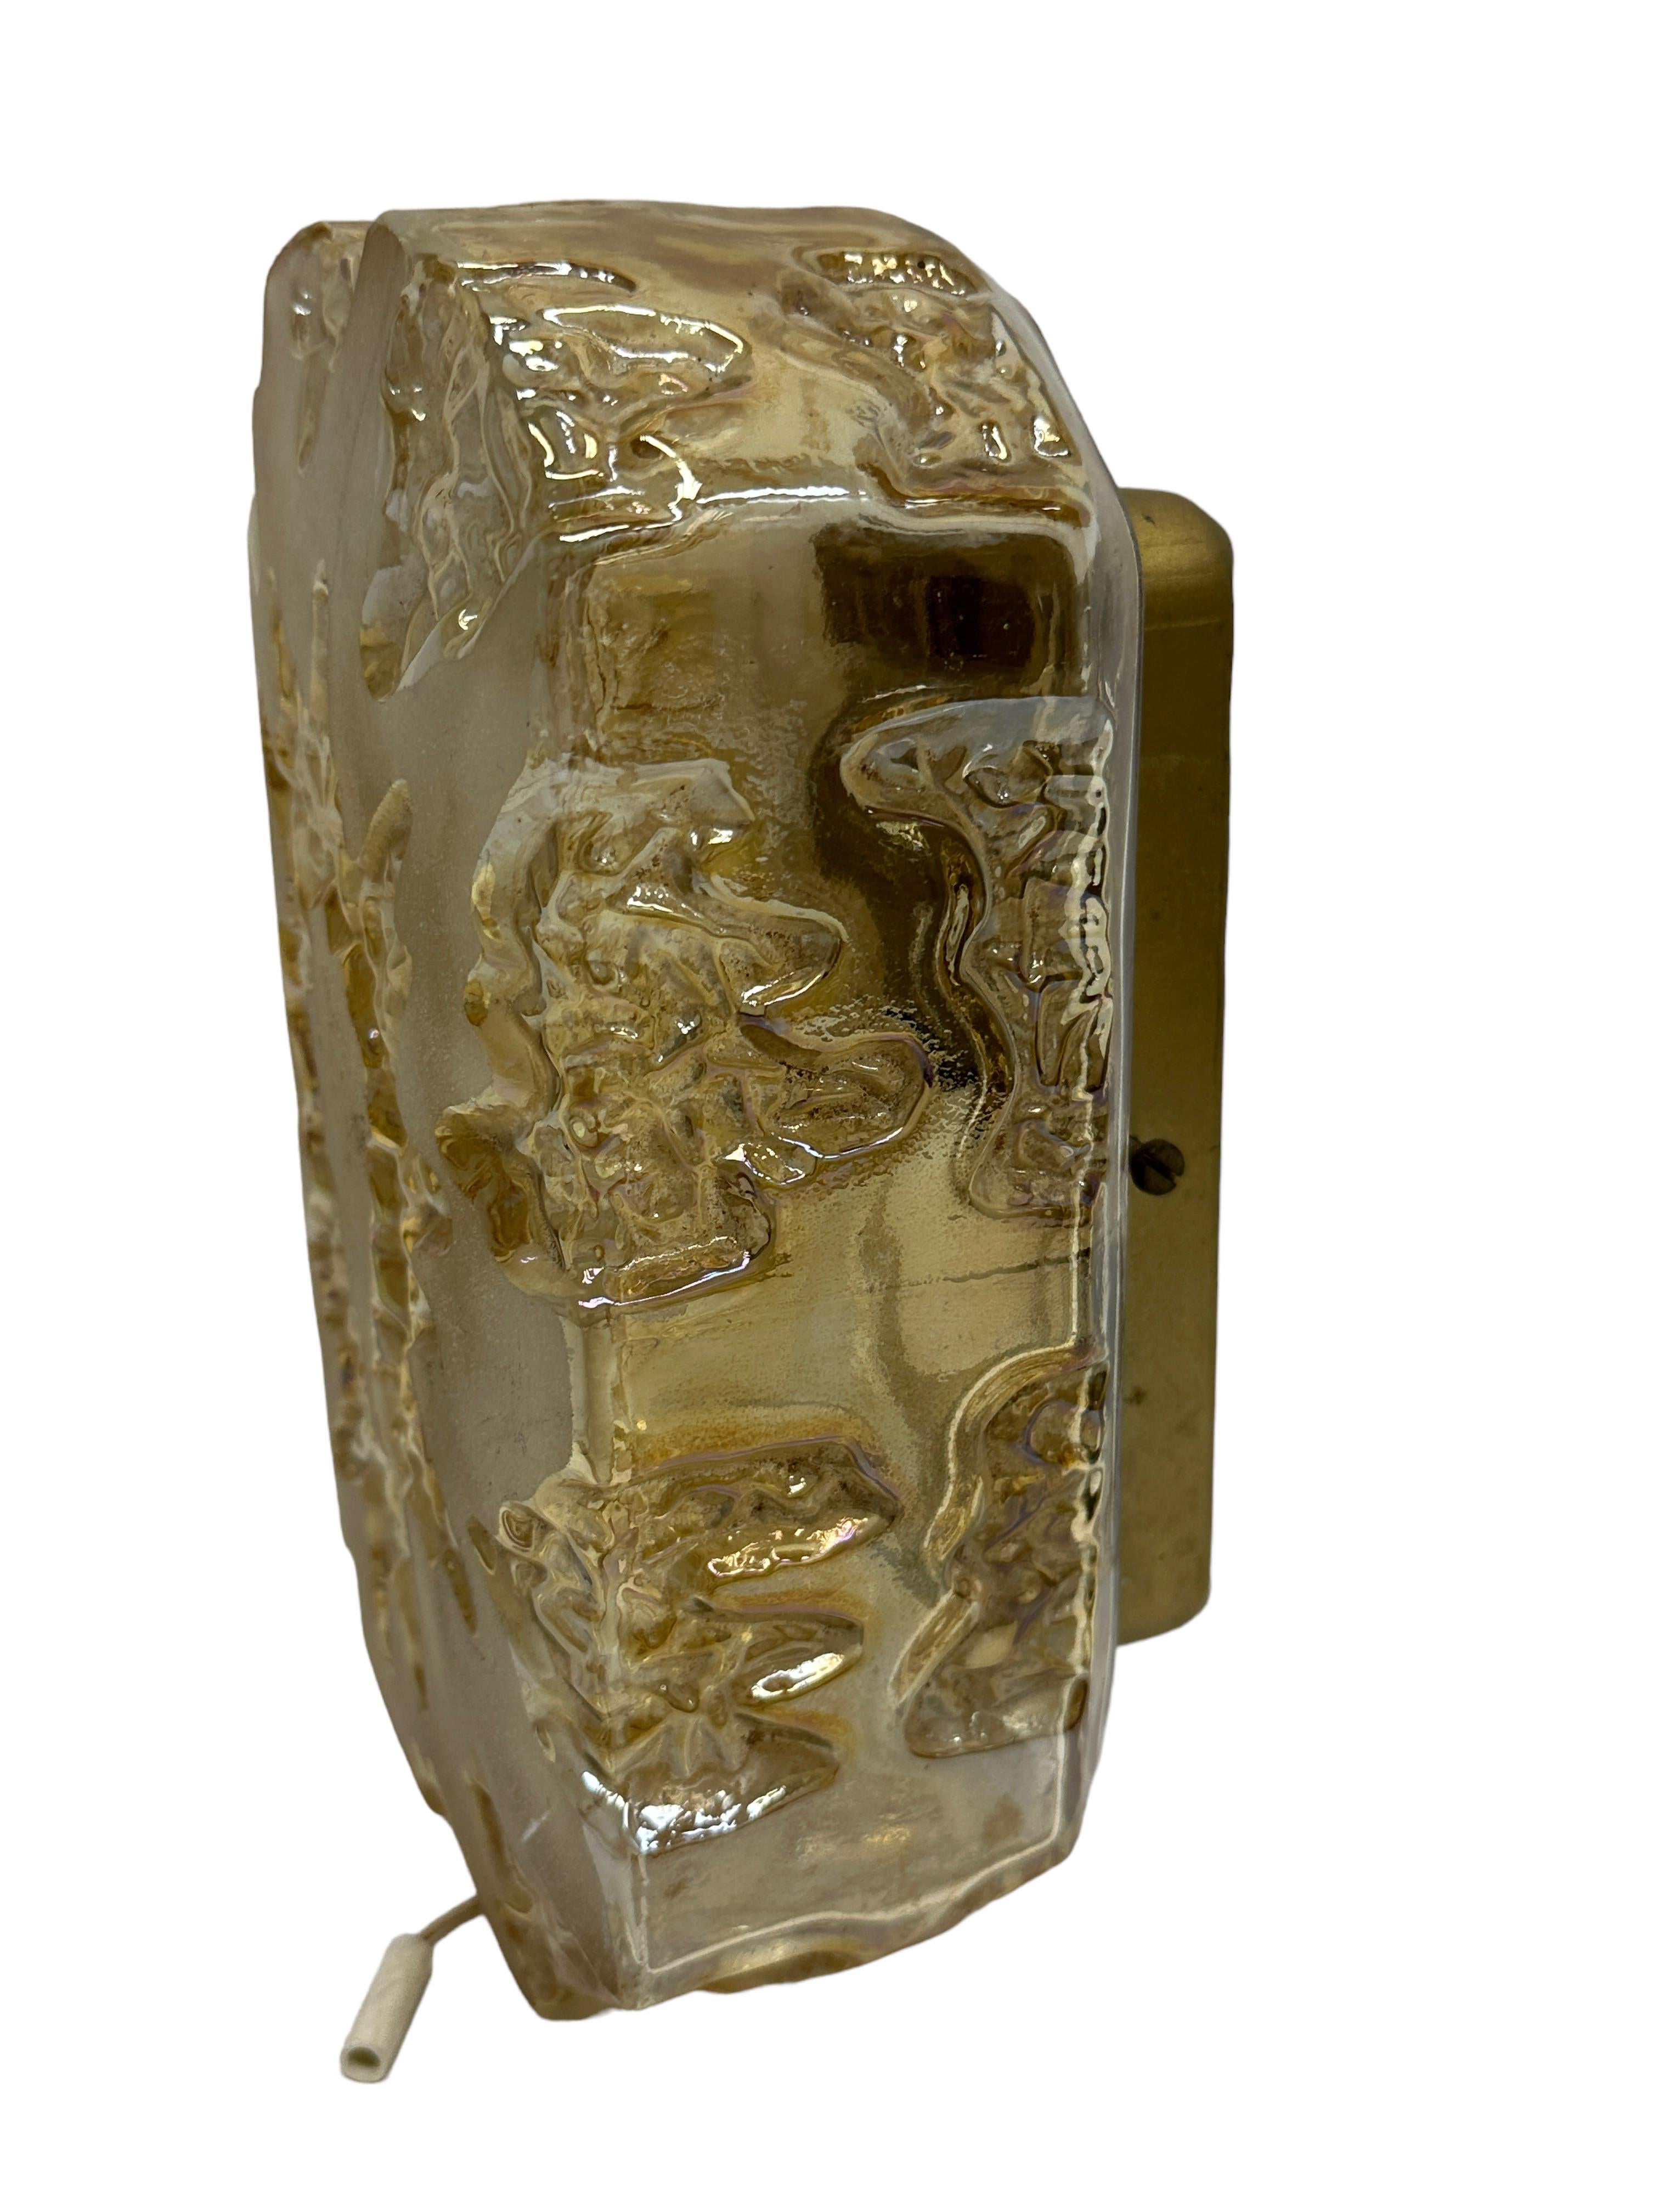 Petite sconce manufactured by Honsel Leuchten Germany. It is a amber tone glass on a gilded metal frame. The fixture has one European style E14 socket. It requires a European E14 candelabra bulb, up to 40 Watt. A nice Wall Lamp for your entry hall